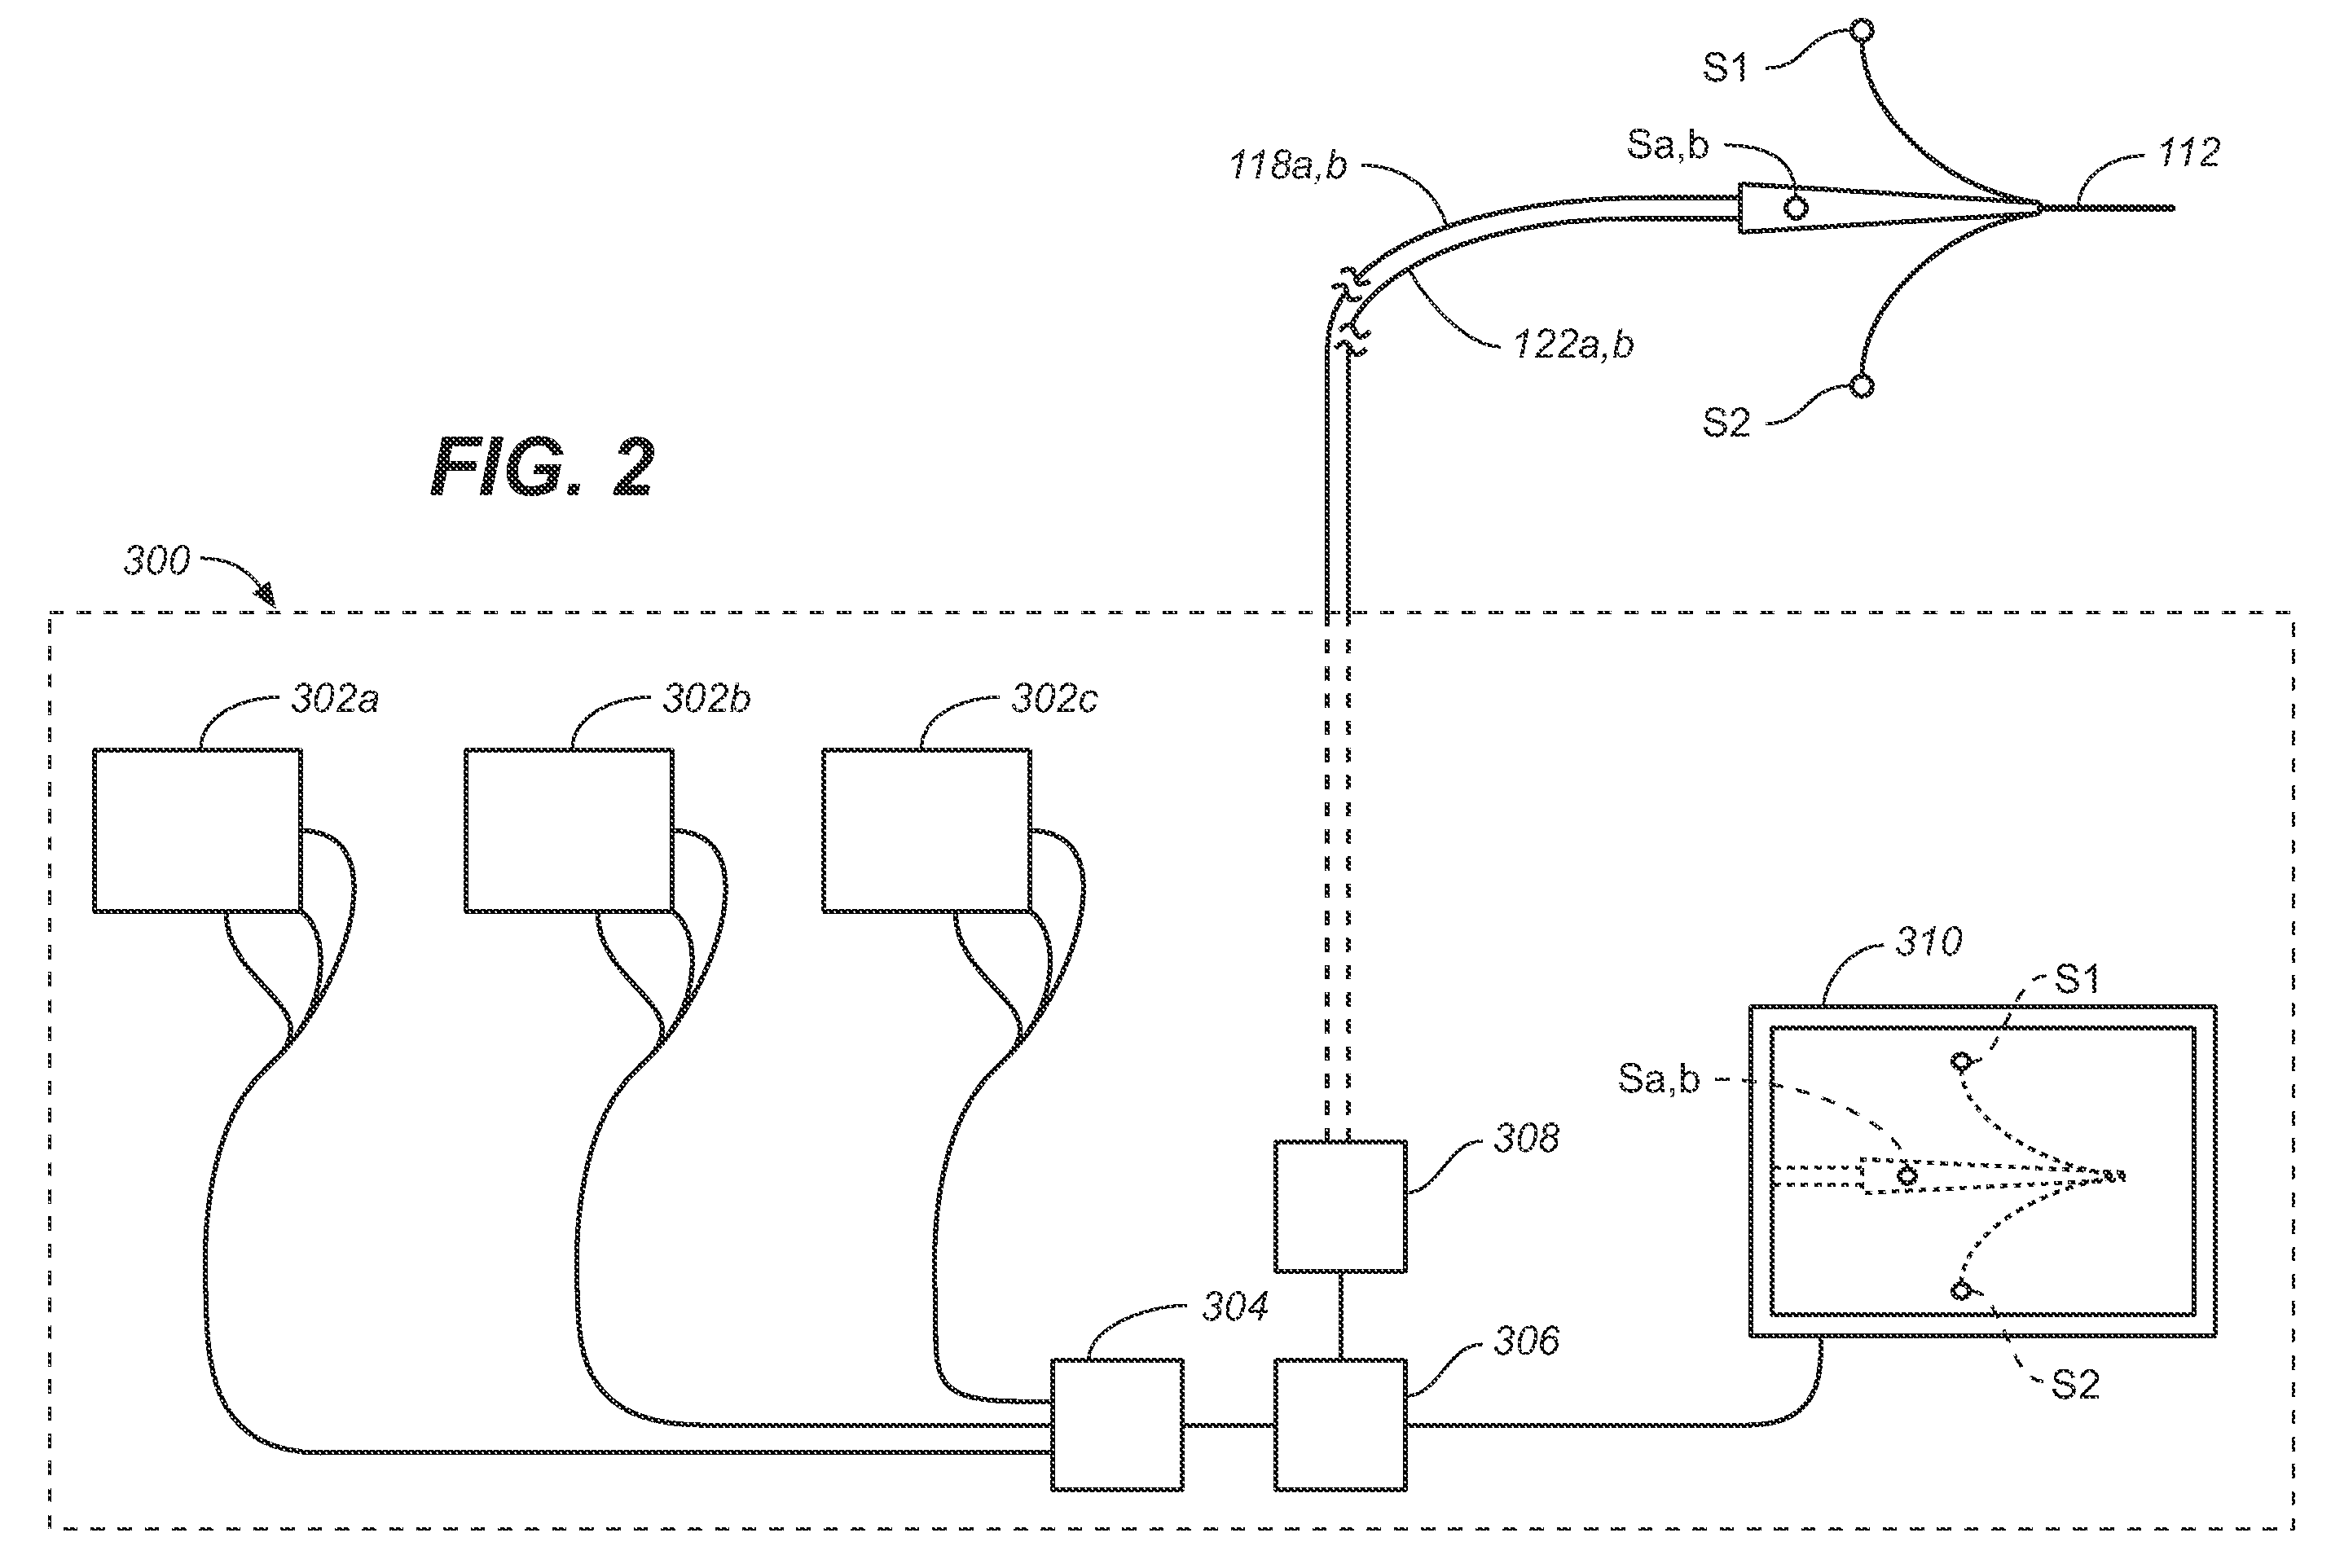 Vascular Position Locating Apparatus and Method